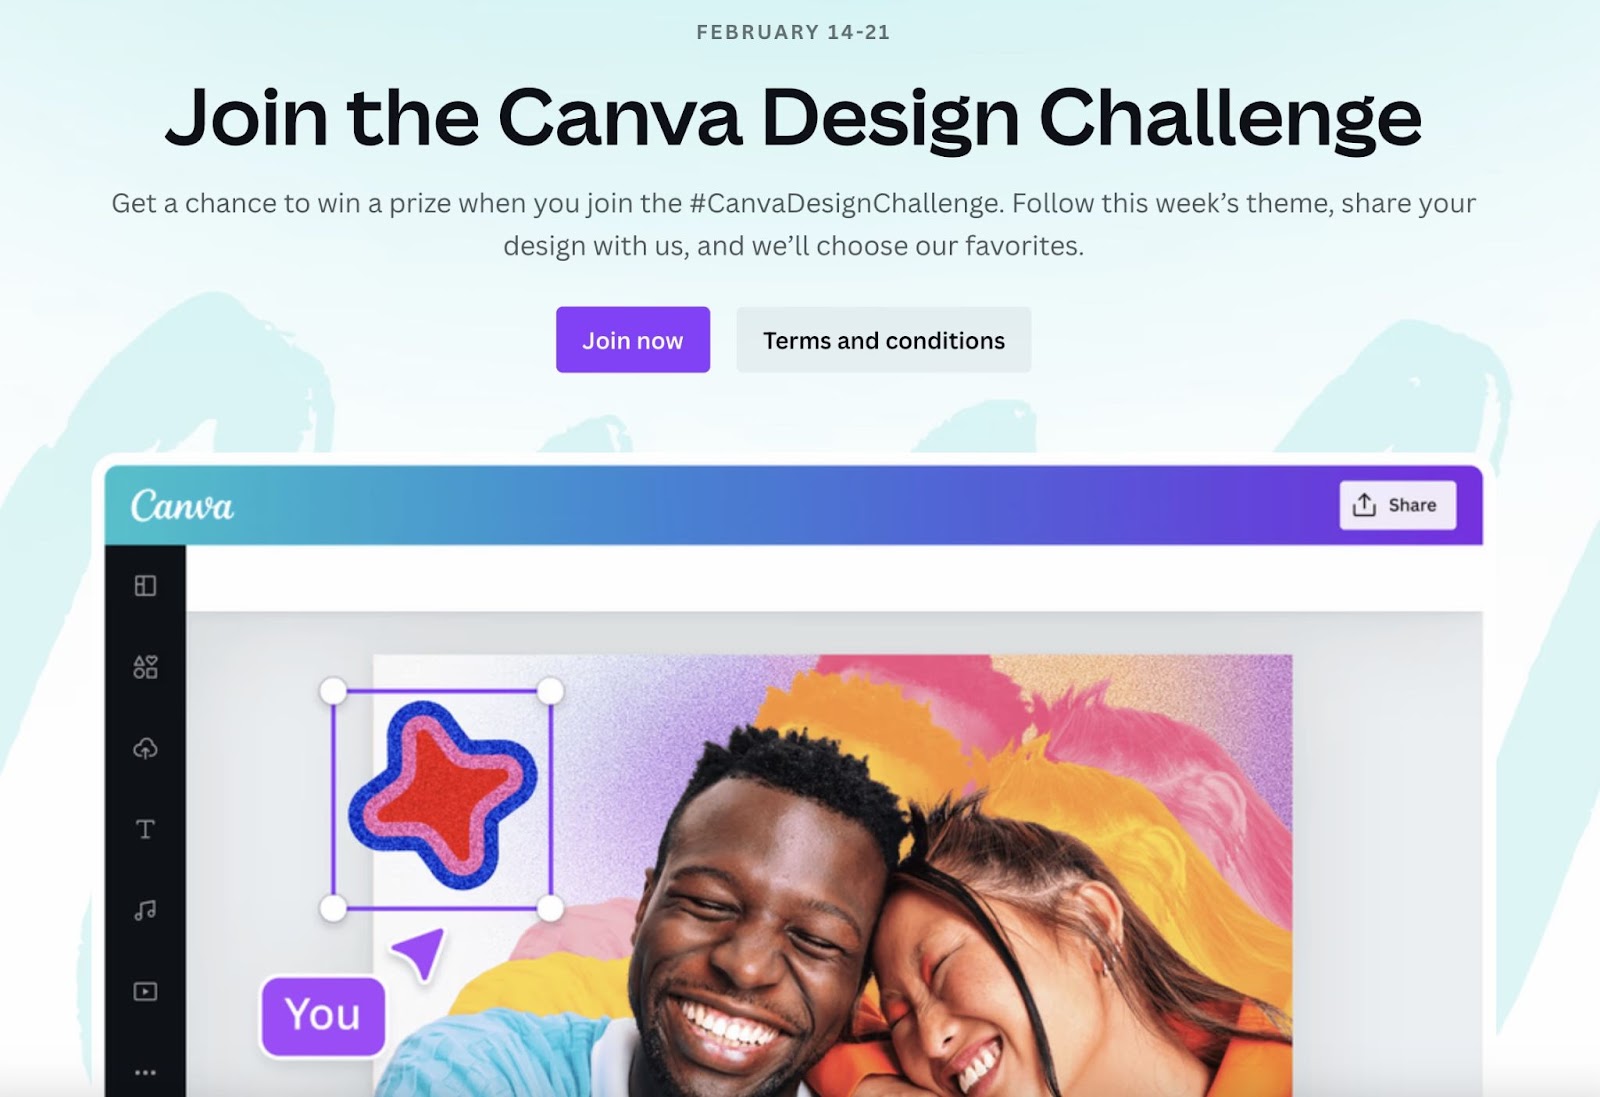 Join the Canva Design Challenge page